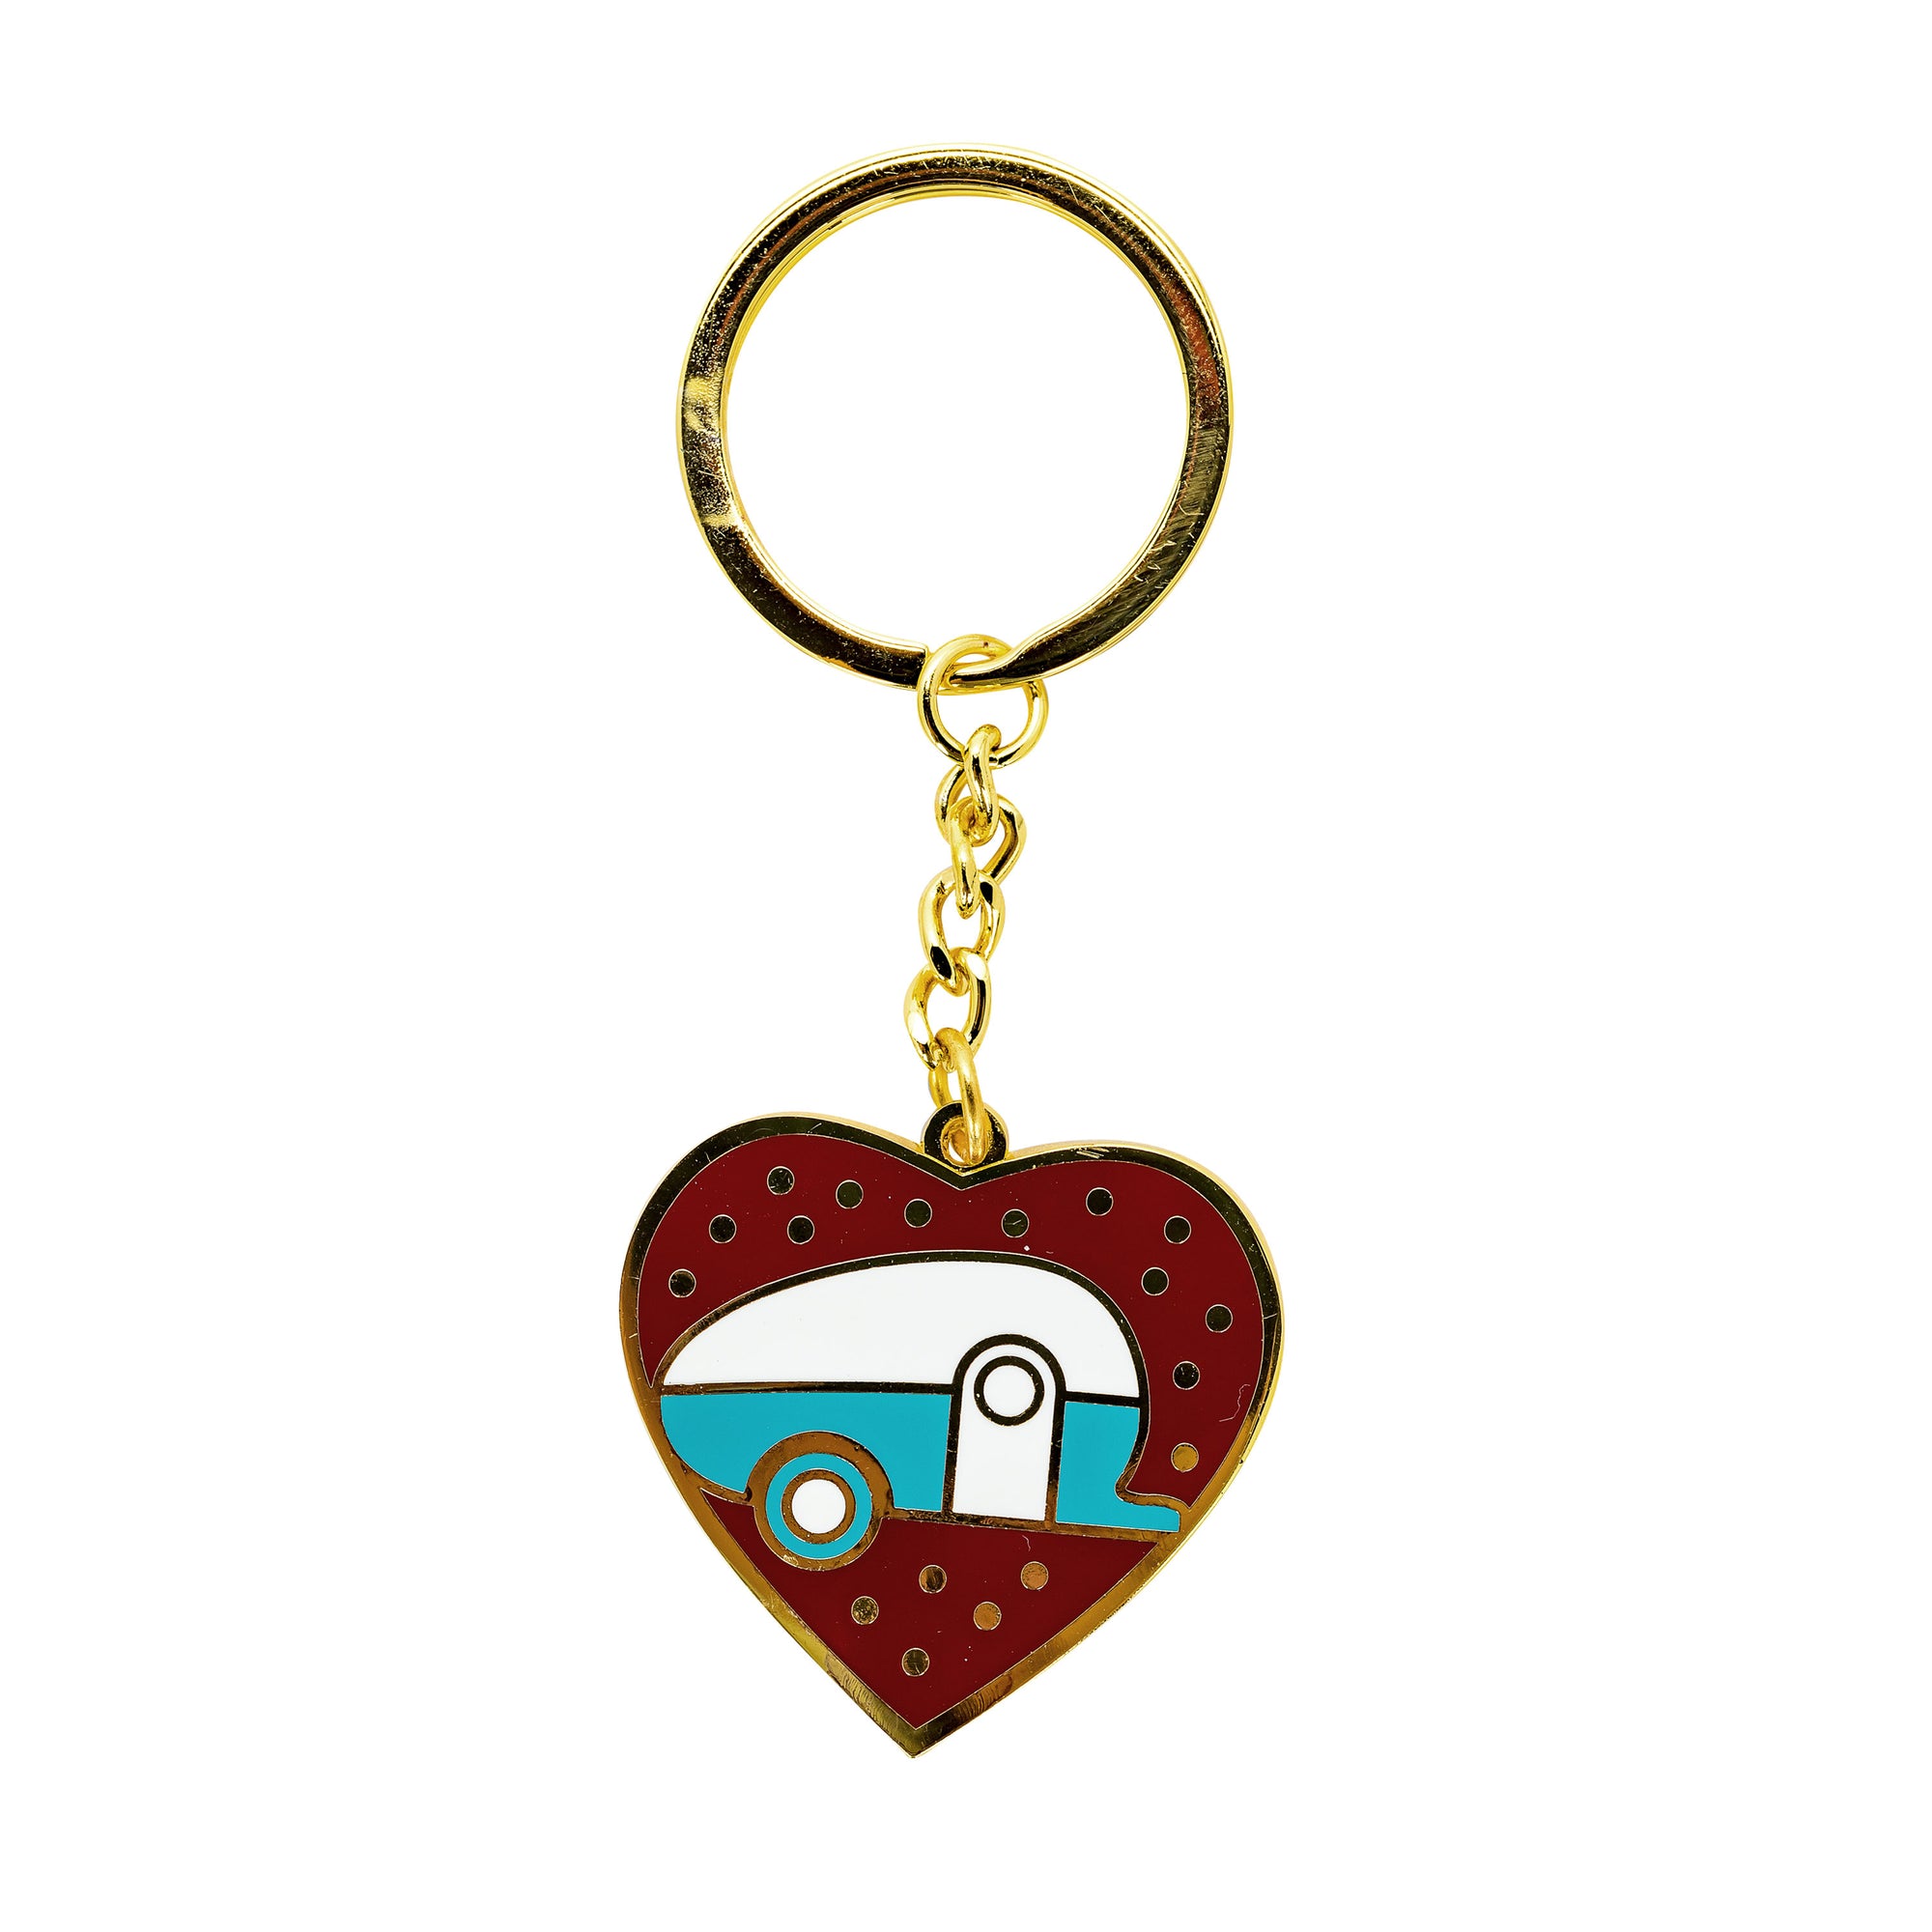 Camco 53287 "Life is Better at the Campsite" Keychain - Red Heart with Teardrop Trailer